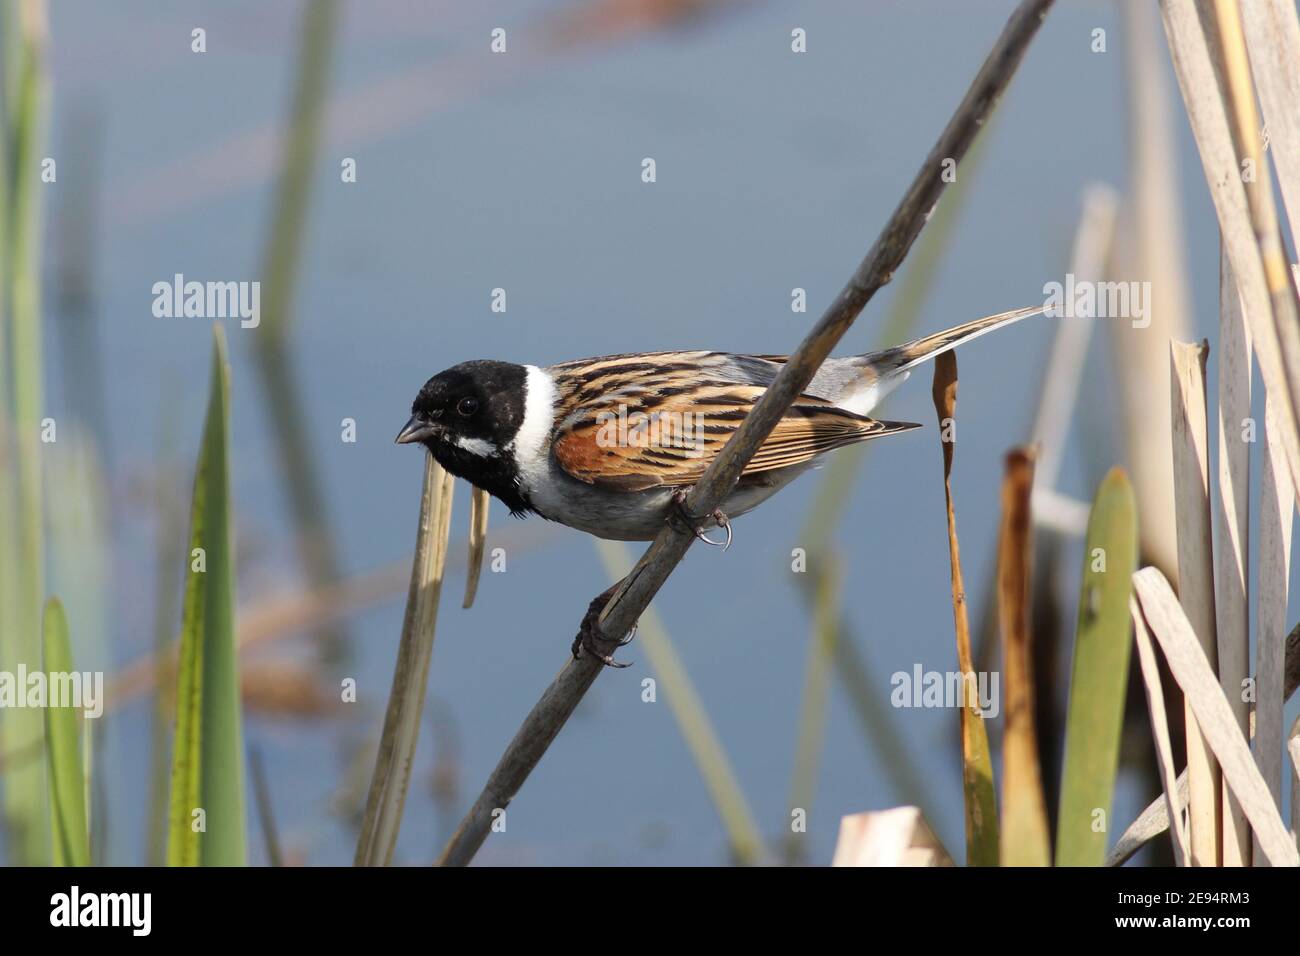 Handsome male Reed Bunting in tip top breeding plumage, balancing on a reed stem. At Yorkshire Water's nature reserve Tophill Low, Watton, E.Yorks, UK Stock Photo